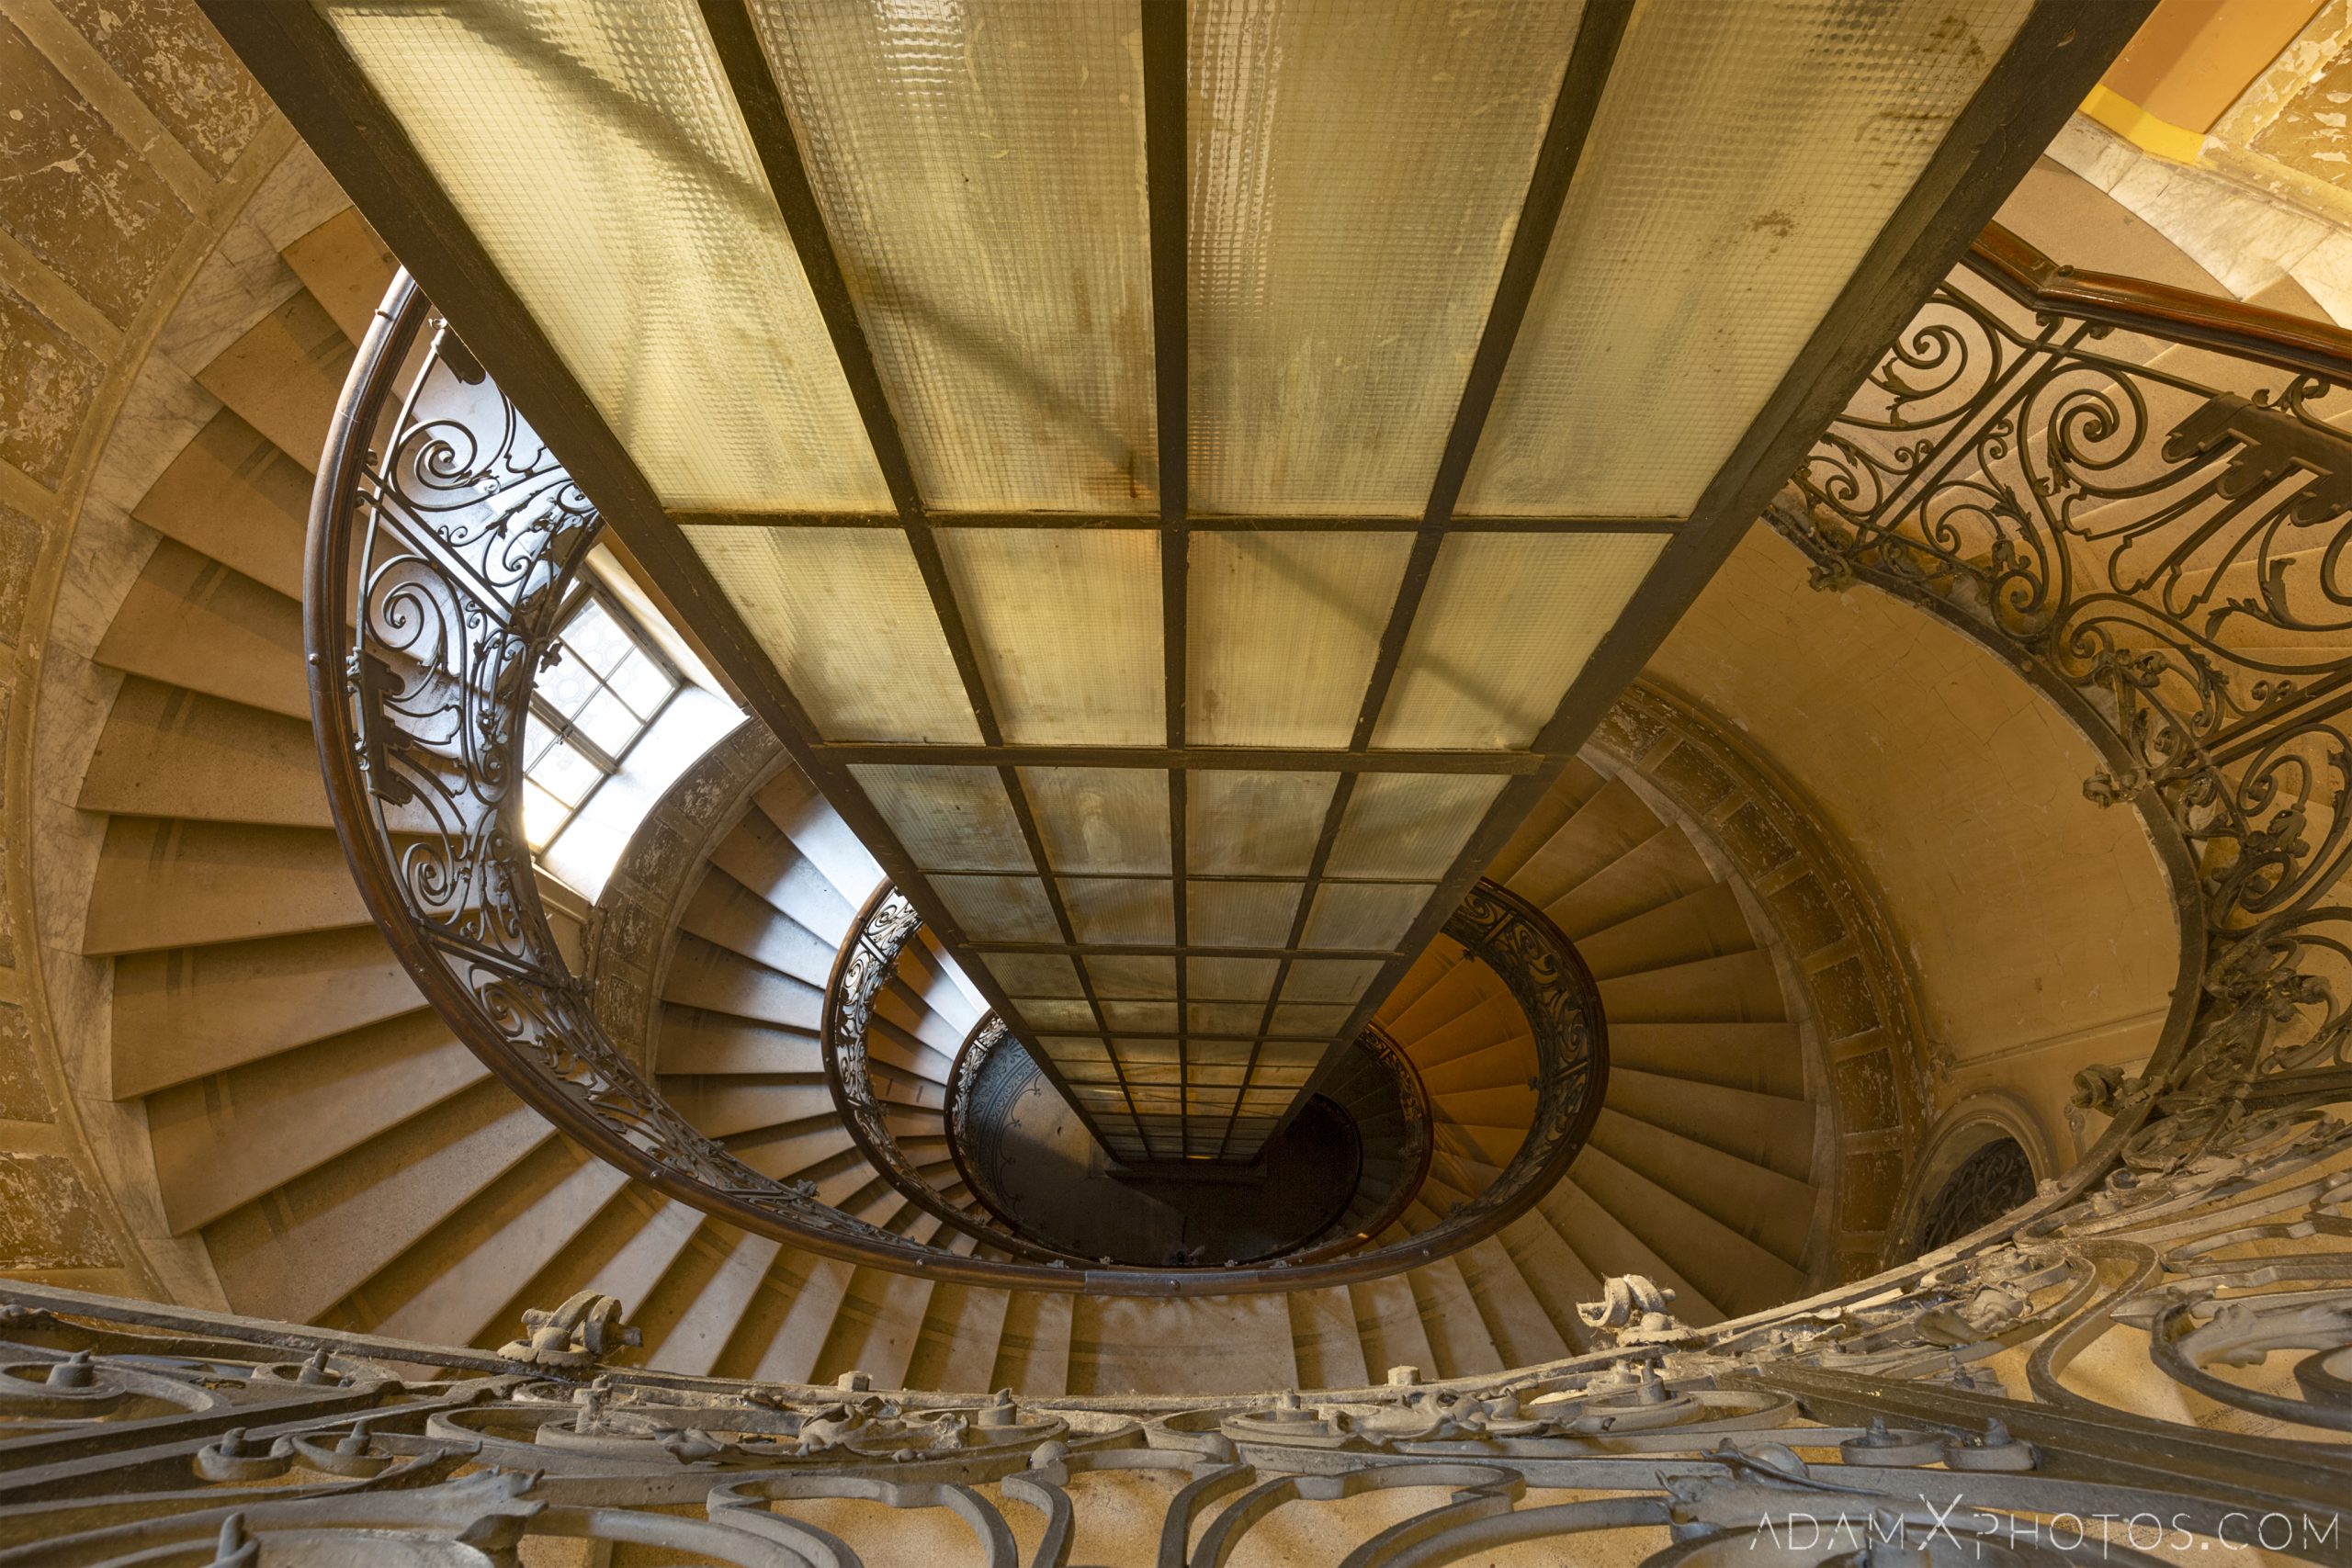 spiral staircase looking down lift Adria Palace Budapest Hungary Adam X Urbex Urban Exploration Access 2018 Blade Runner 2049 Abandoned decay ruins lost forgotten derelict location creepy haunting eerie security ornate grand neo baroque